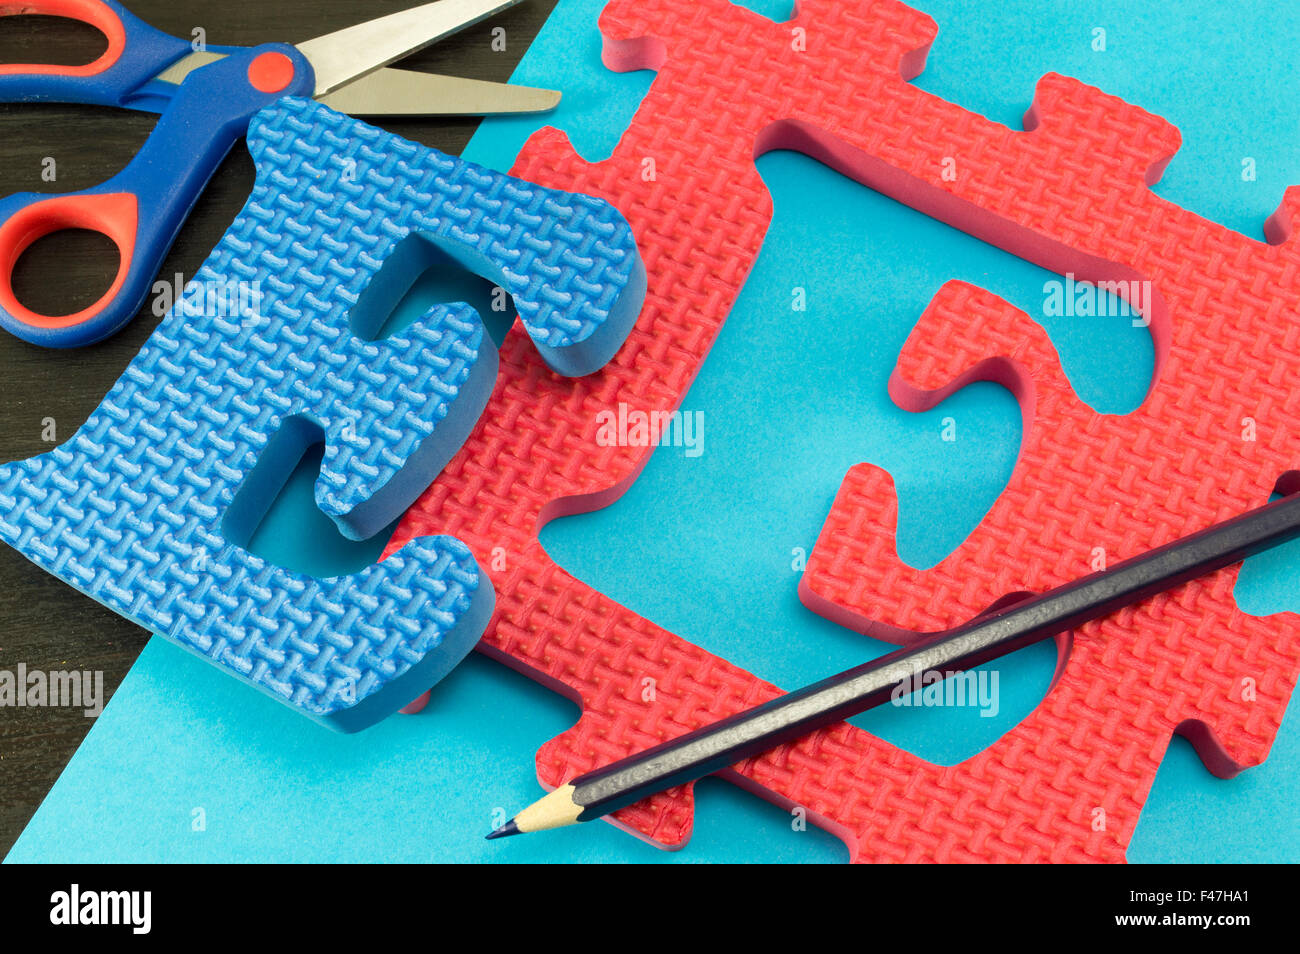 Learning the letter E The letter E learnign puzzle Stock Photo